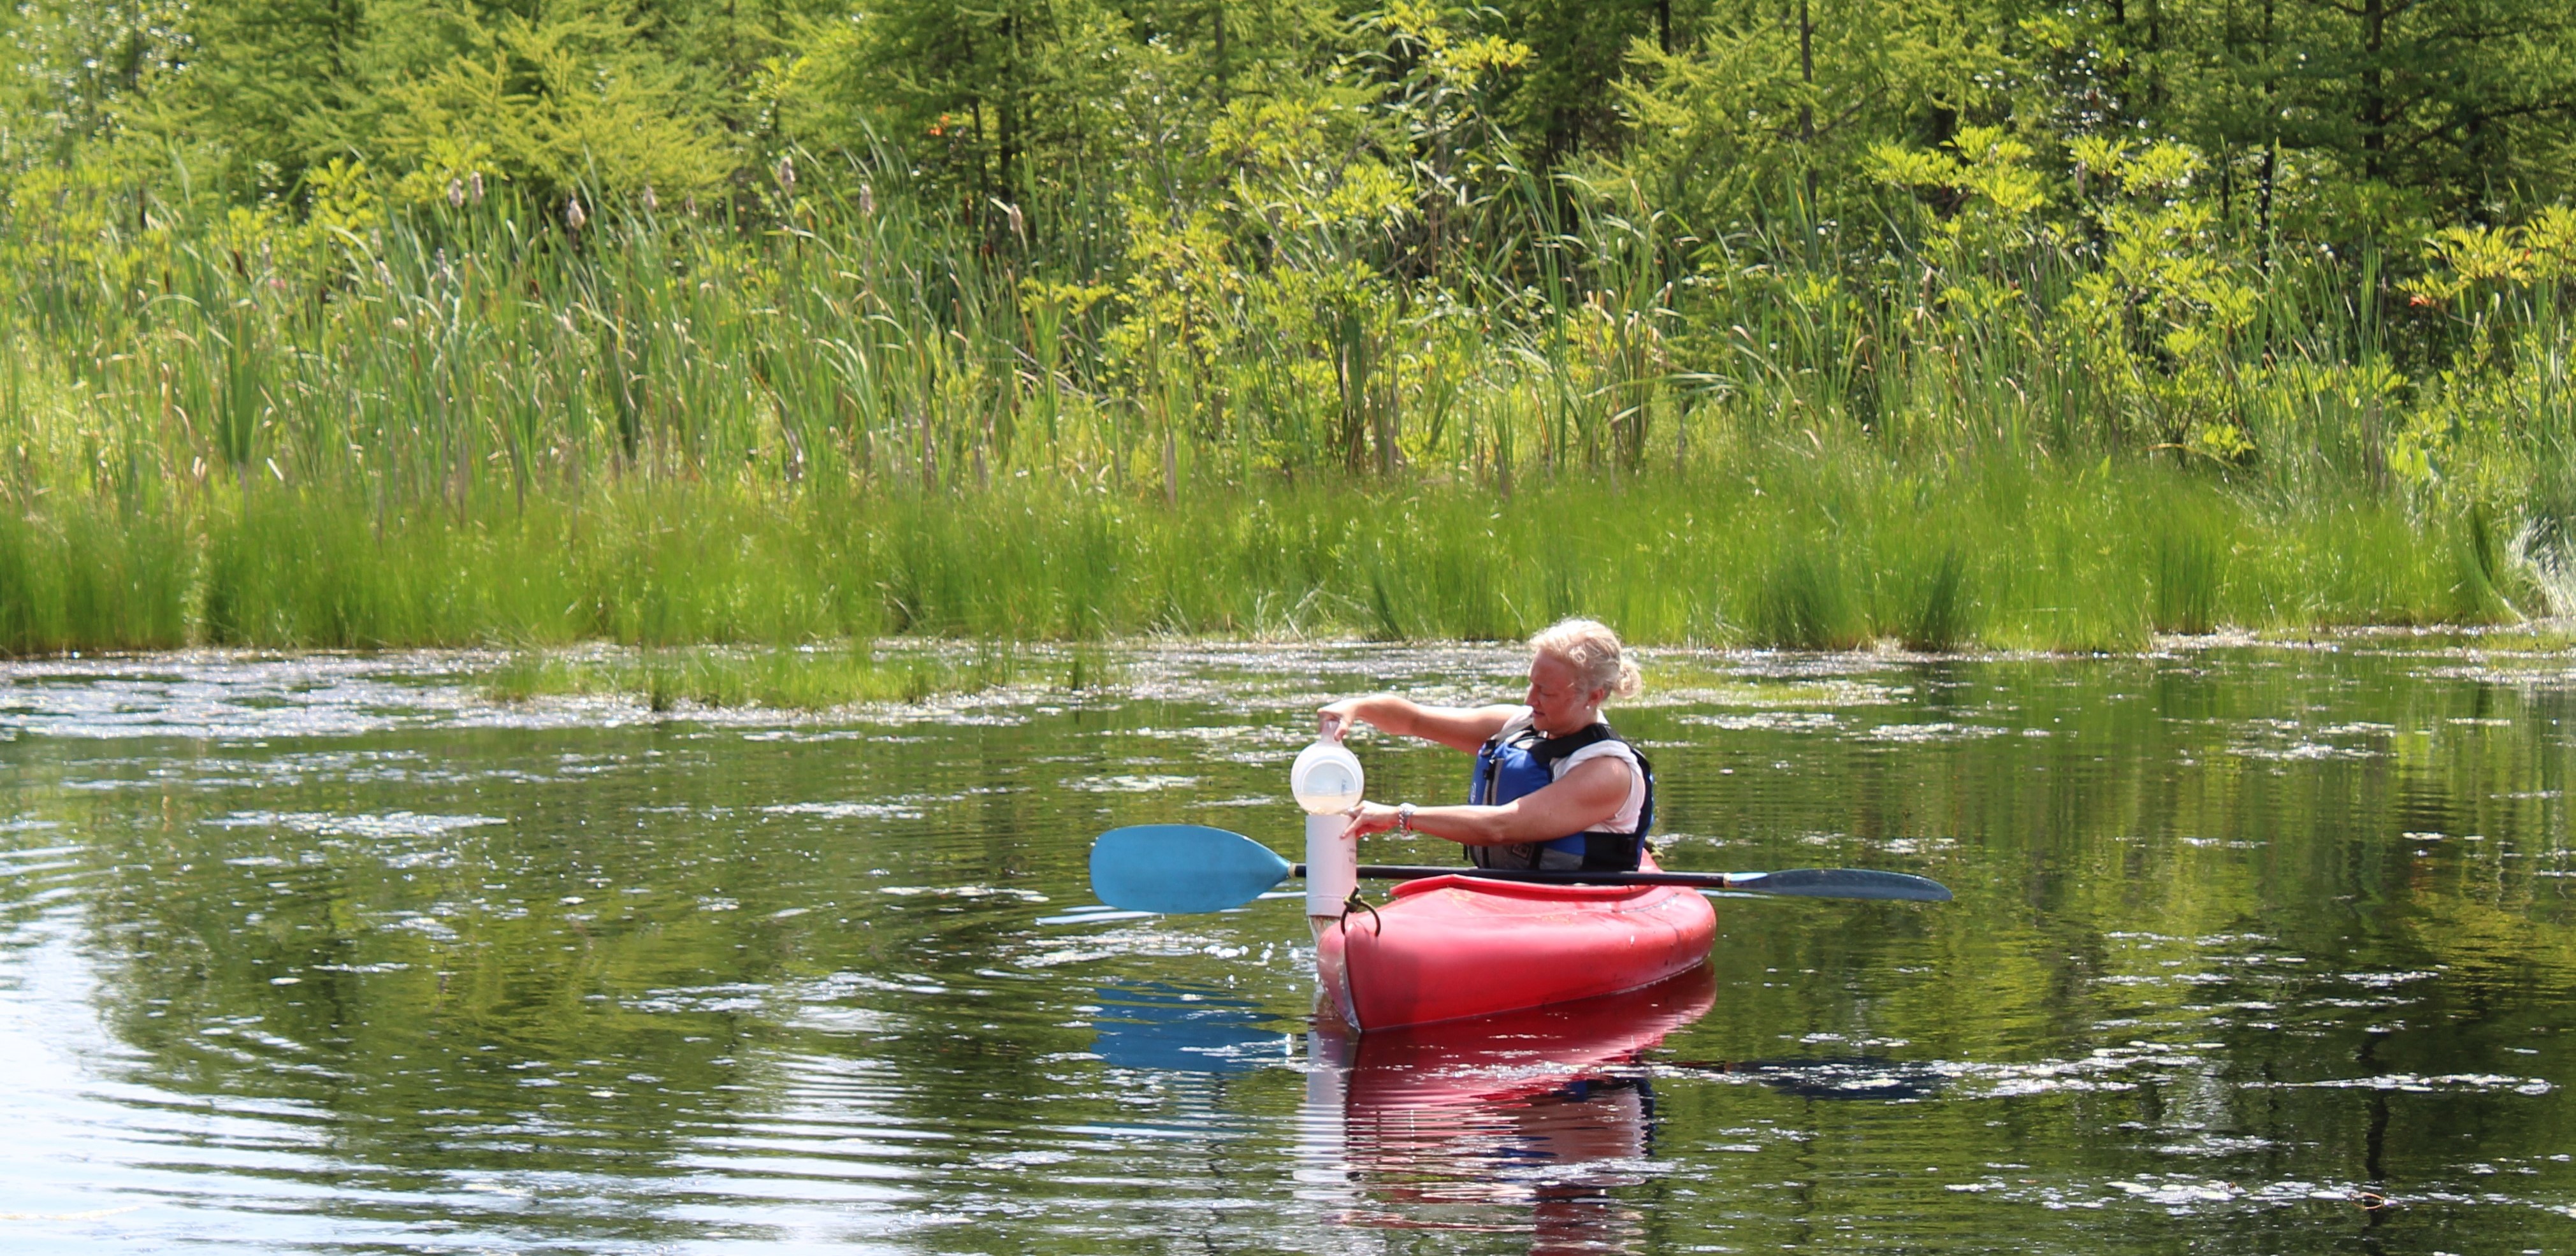 "Pam on a lake in a kayak taking a water sample"